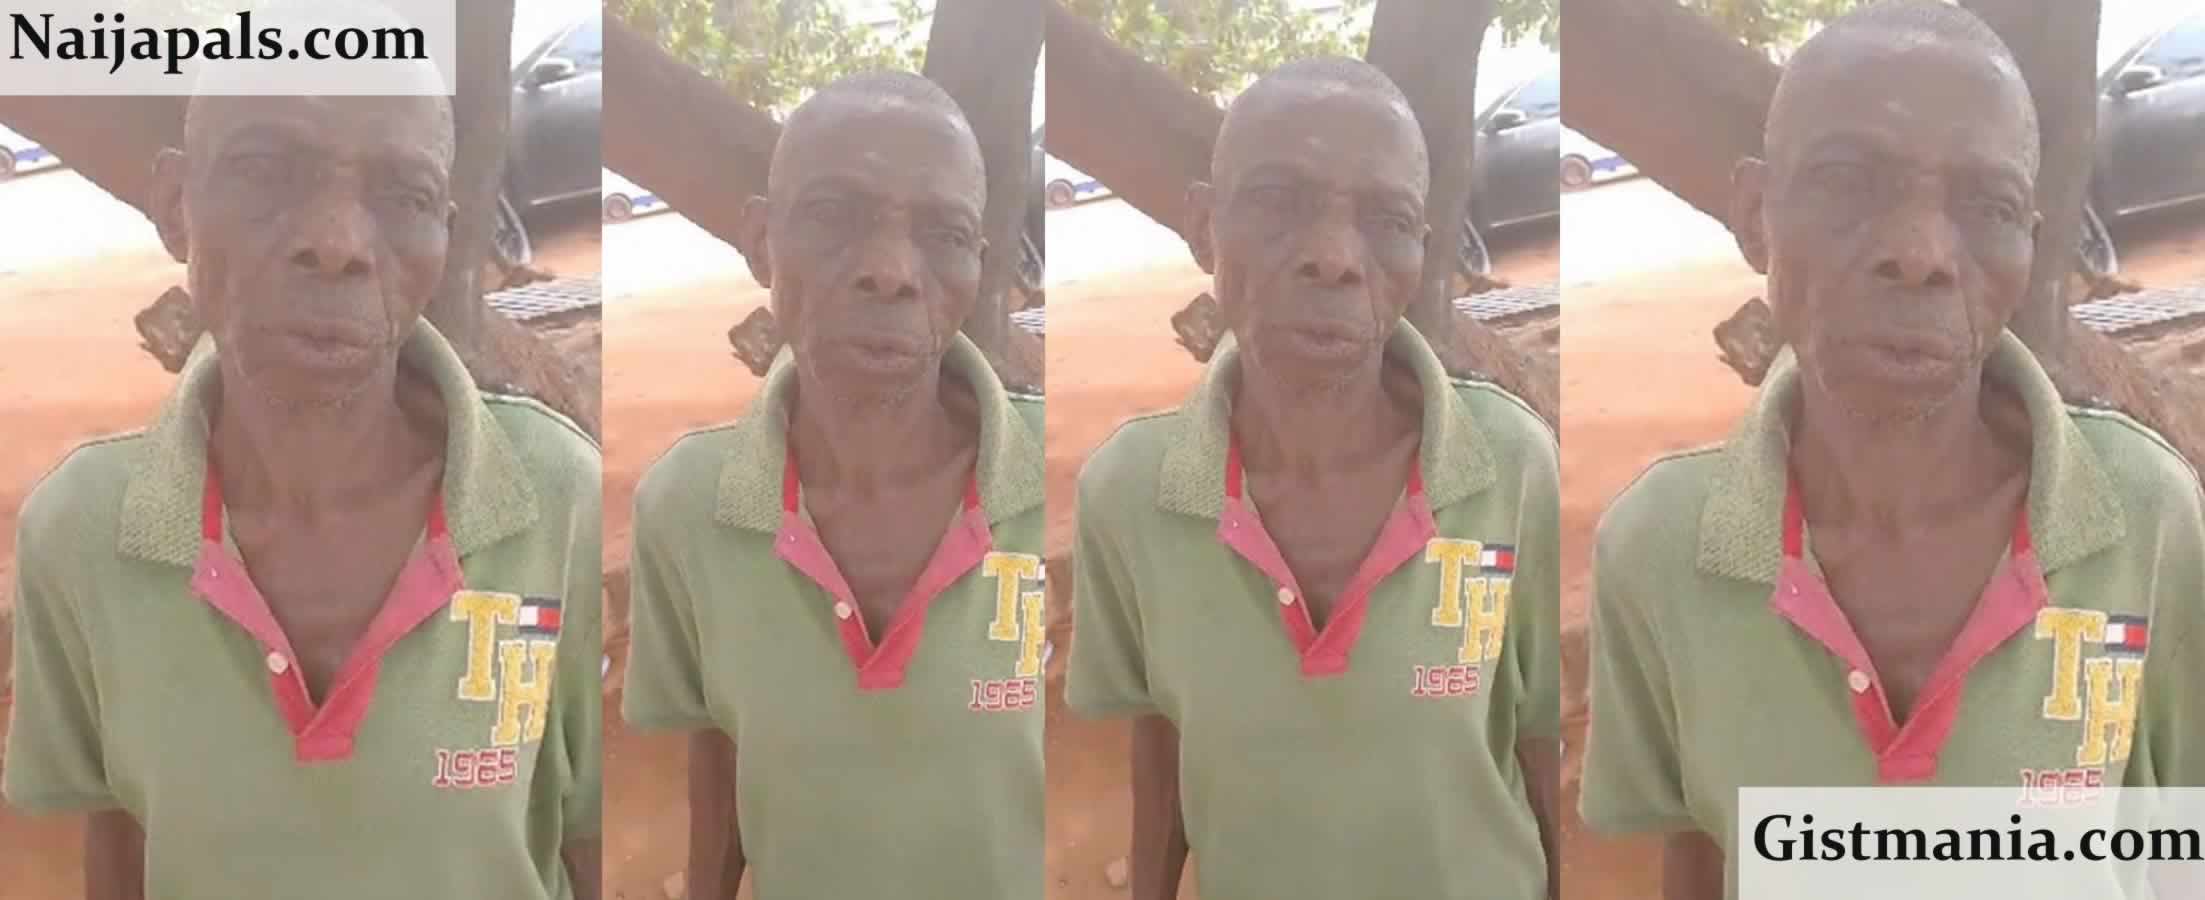 75-Year-Old Man, Nwankwo Nweke Arrested For Assaulting 8-Year-Old Girl In Anambra State